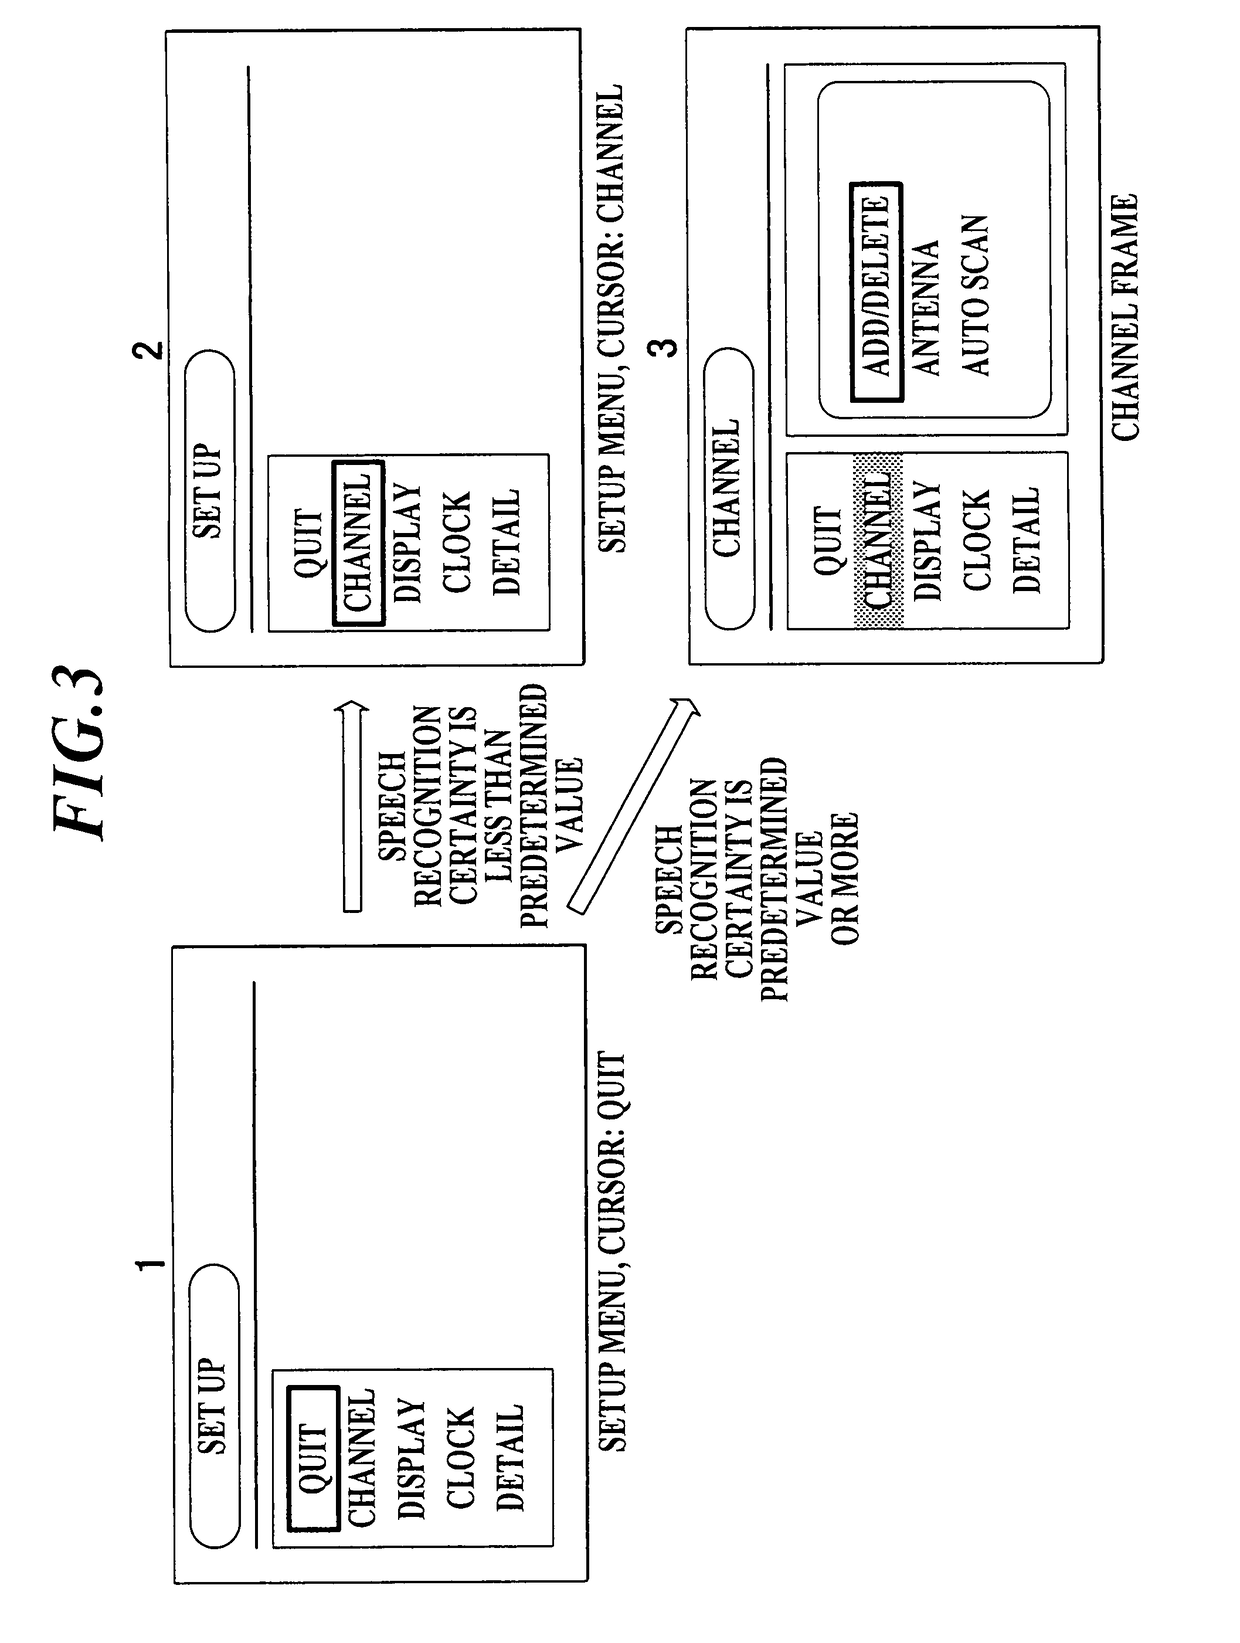 Digital television receiver controlled by speech recognition